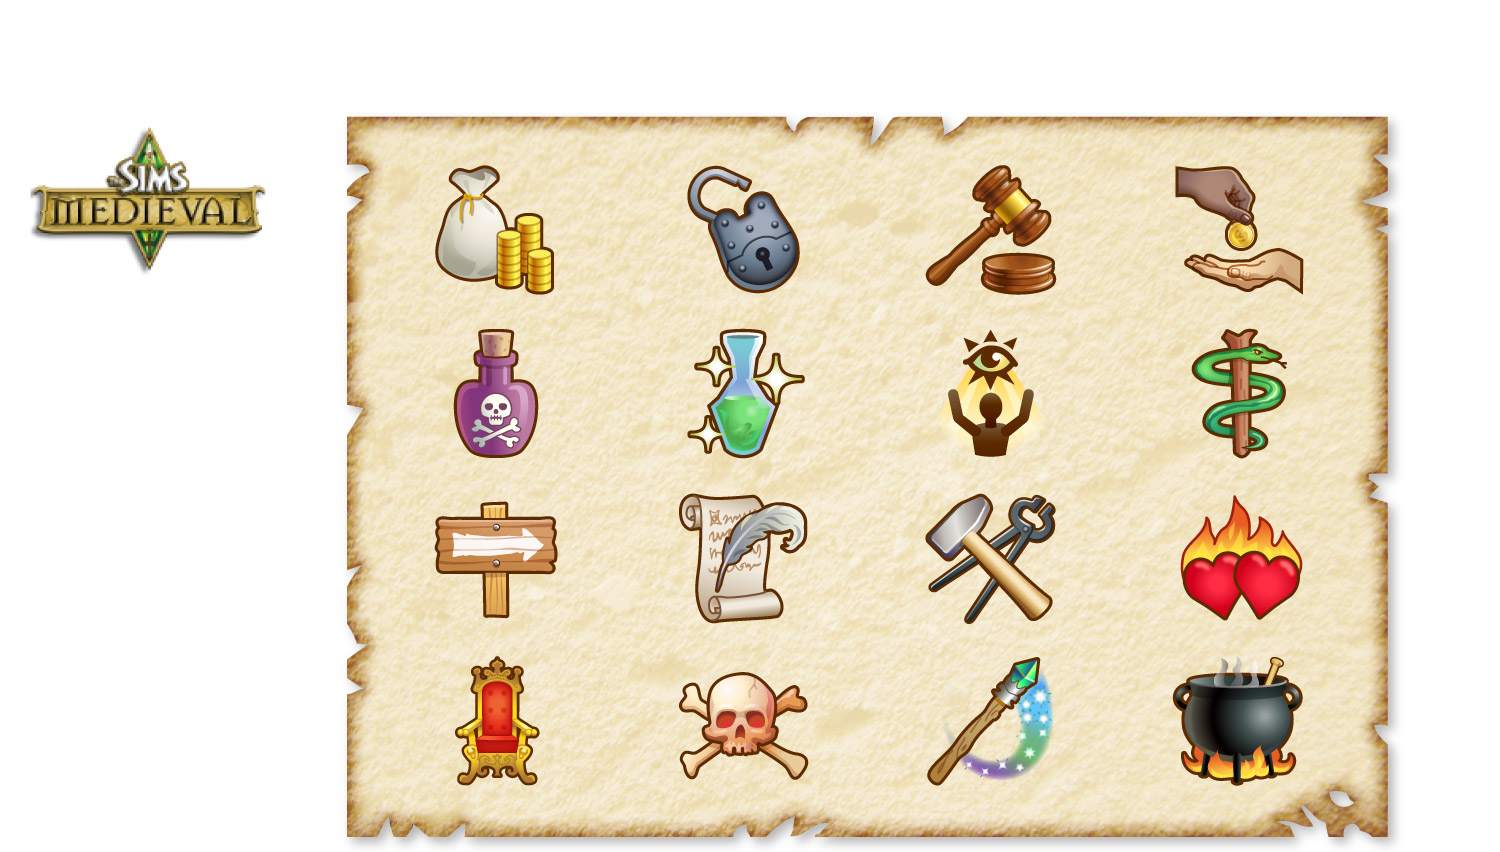 Icons for EA Games' Sims Medieval